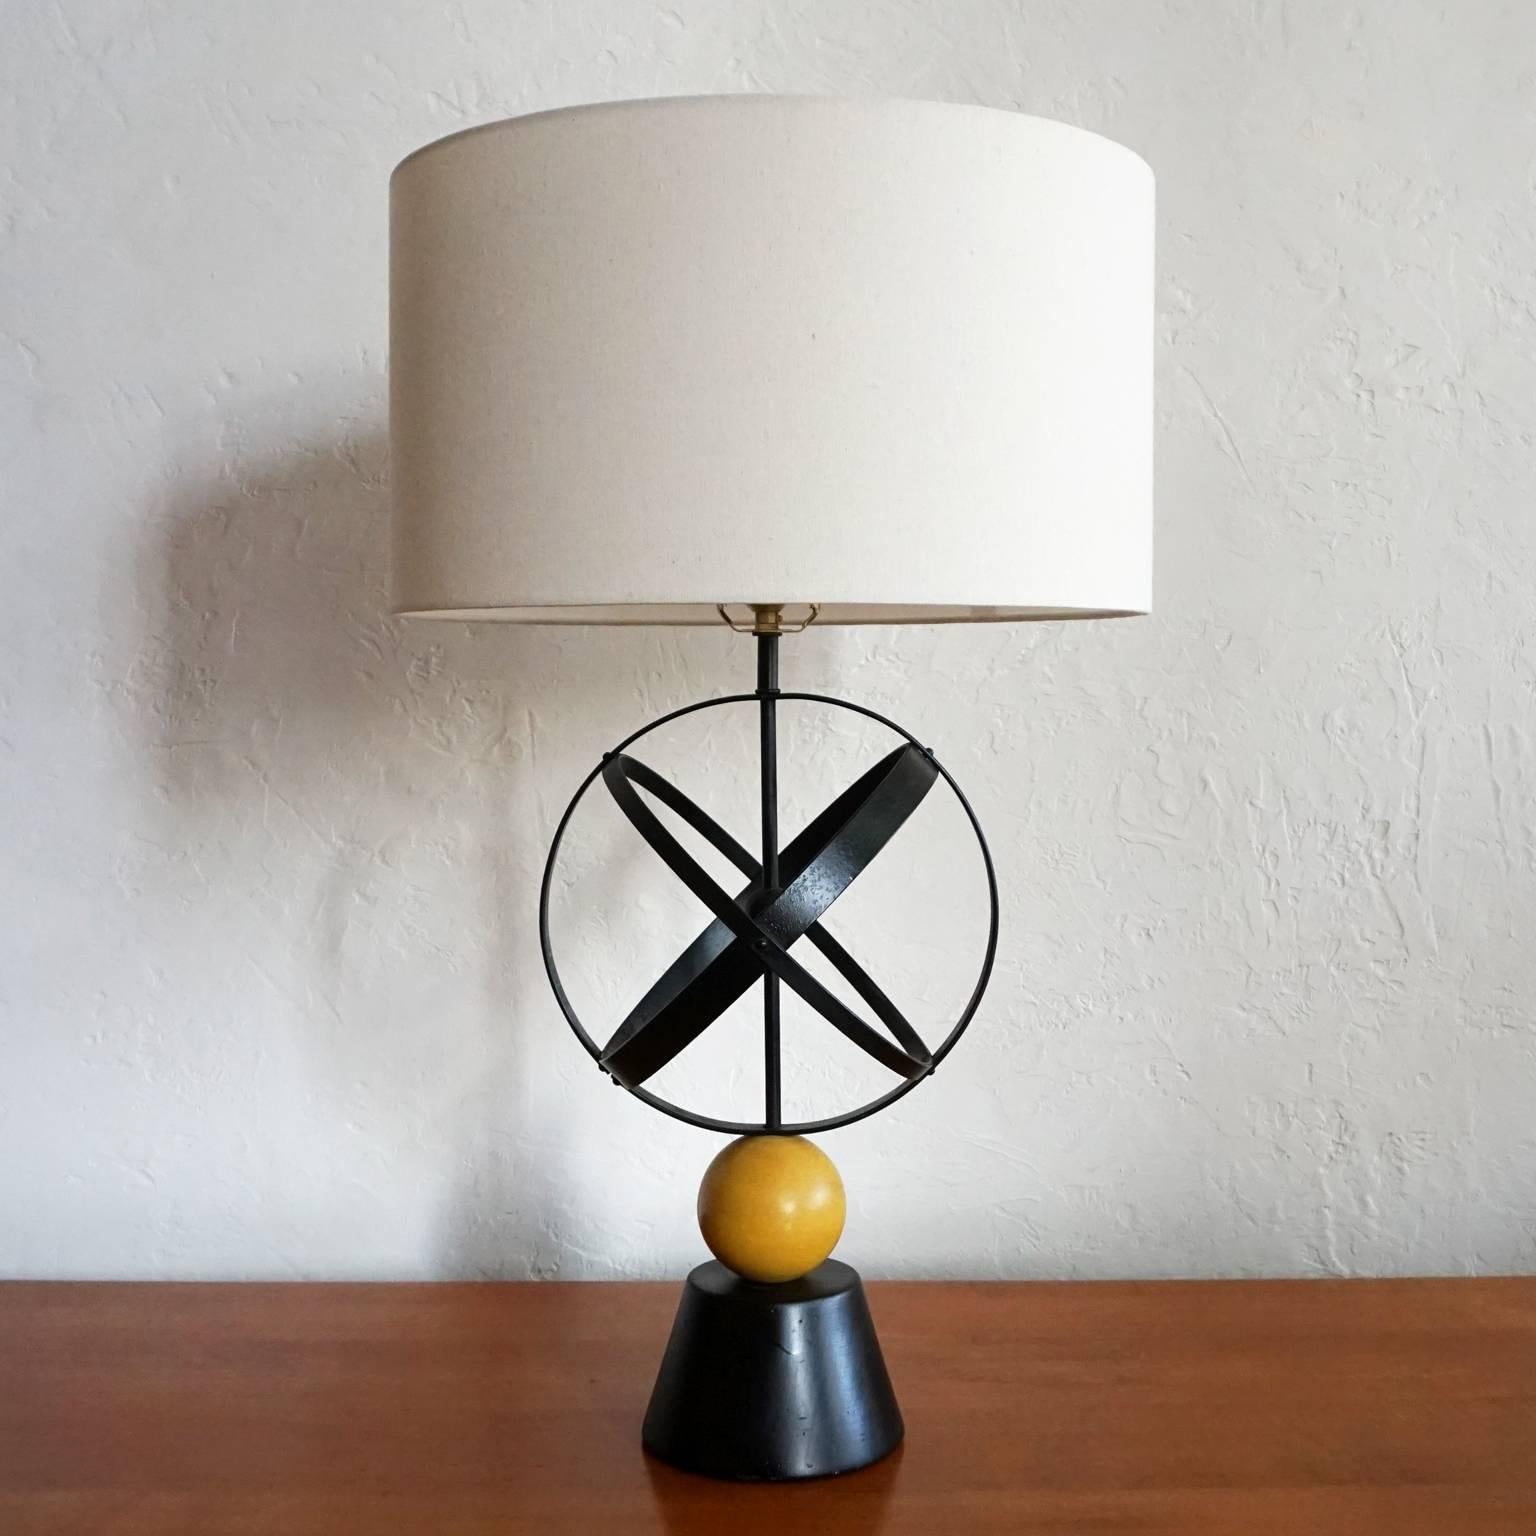 1950s lamp with metal bands and wood ball.